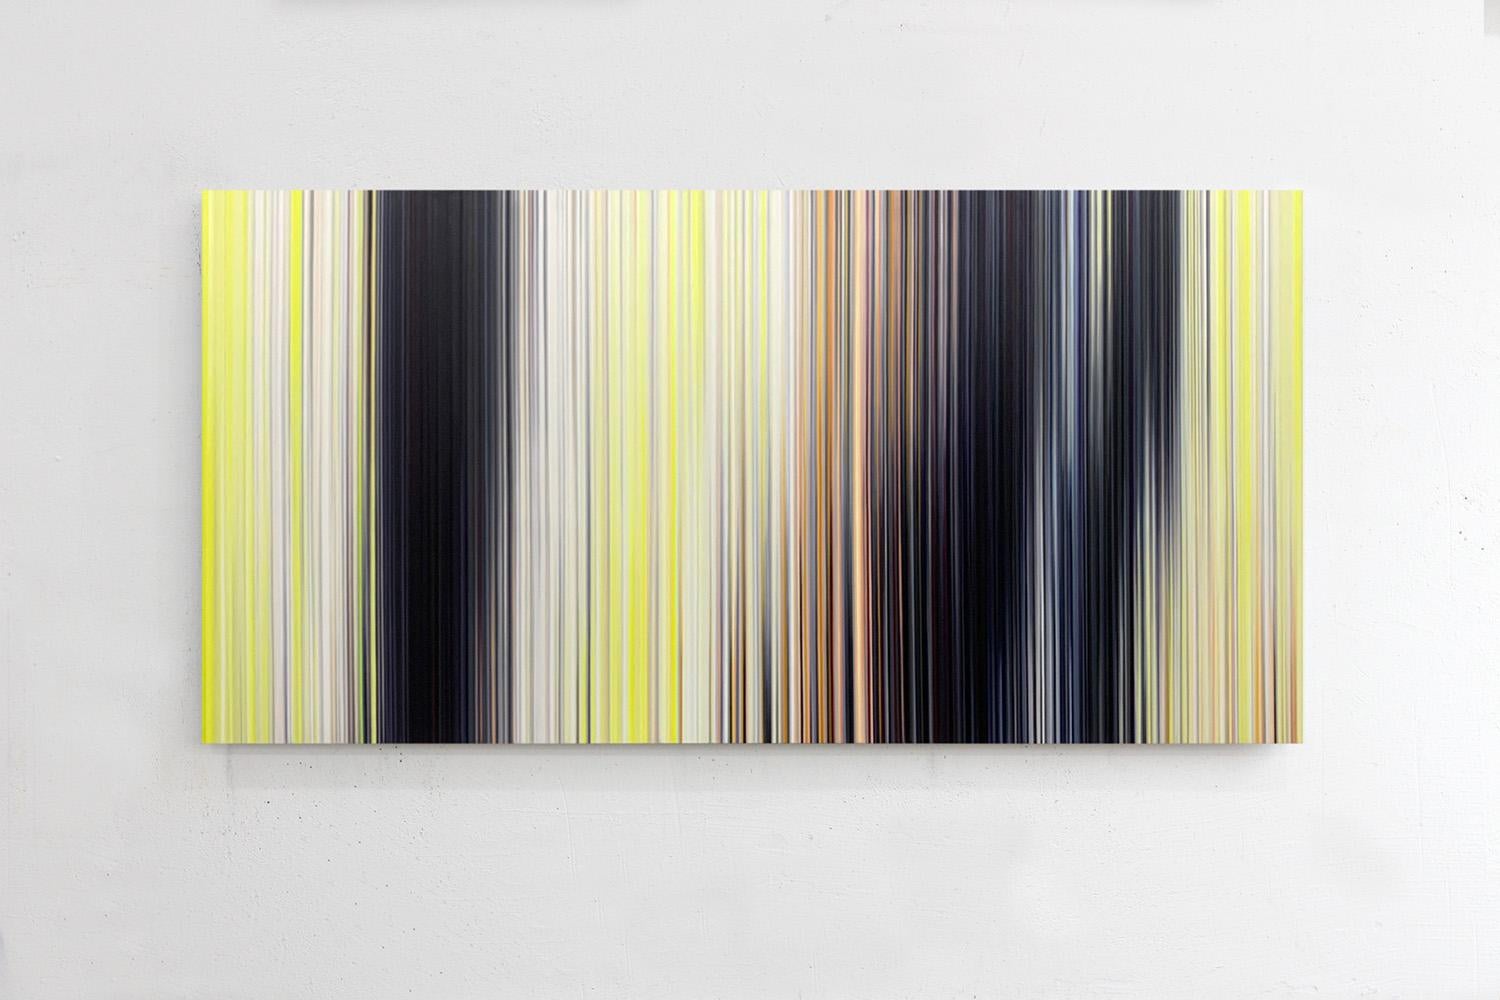 Light'n'Lines No.28 is a unique oil on Alu-Dibond painting by contemporary artist Doris Marten, dimensions are 60 × 120 cm (23.6 × 47.2 in).
The artwork is signed, sold unframed and comes with a certificate of authenticity.

The visual effects